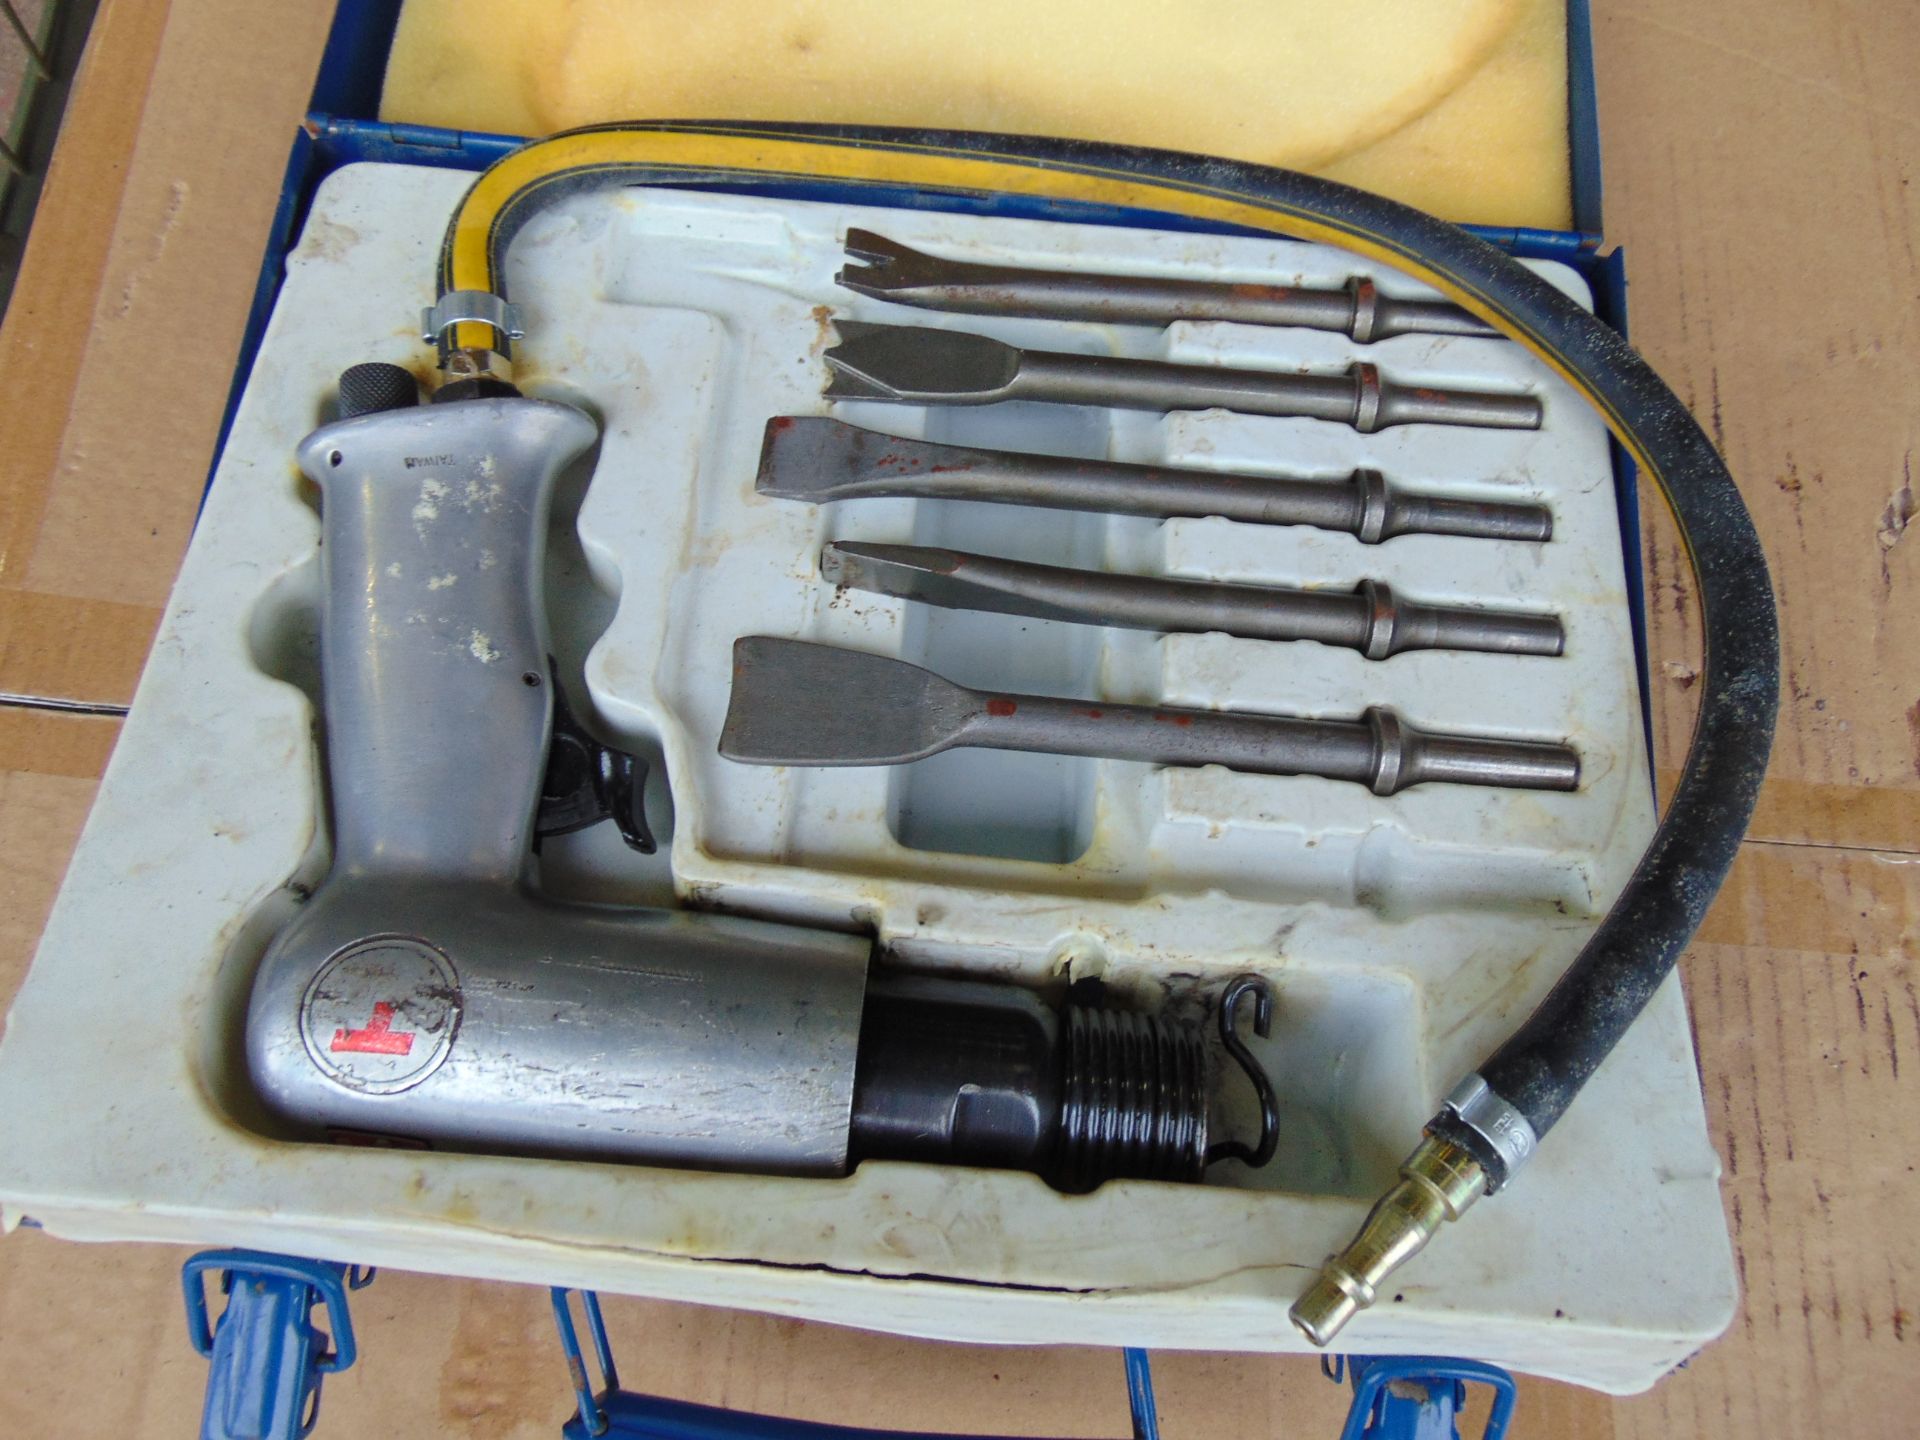 Desoutter Universal Air Chisel Kit from UK Fire Service Workshop in Case with Accessories - Image 4 of 8